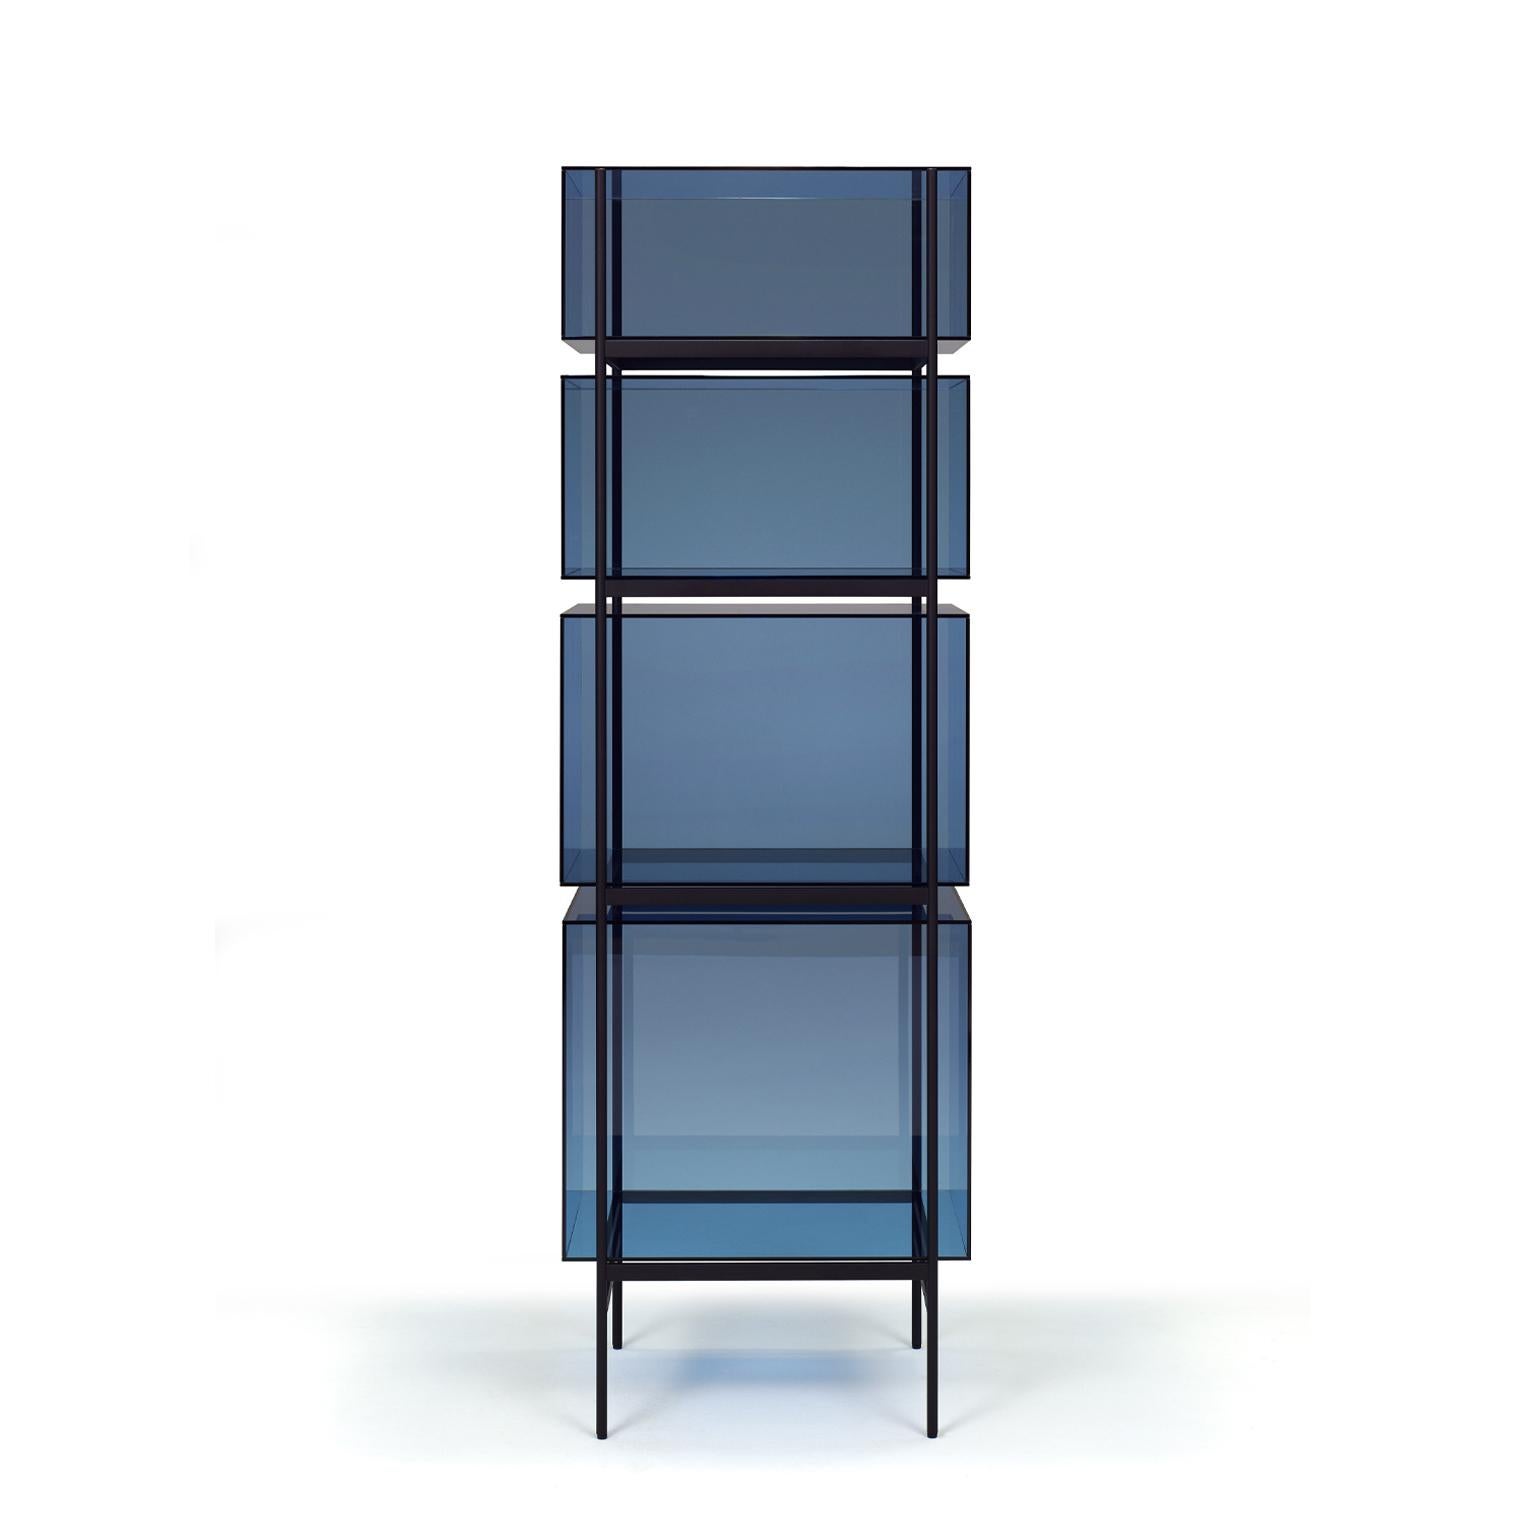 Lyn cabinet - European, Minimalist, blue, black base, German, cabinet, 21st century, high size

Studio Visser & Meijwaard describe their conception of lyn as a “graphic interplay between glass and the metal frameworks”. The doorless and diverse